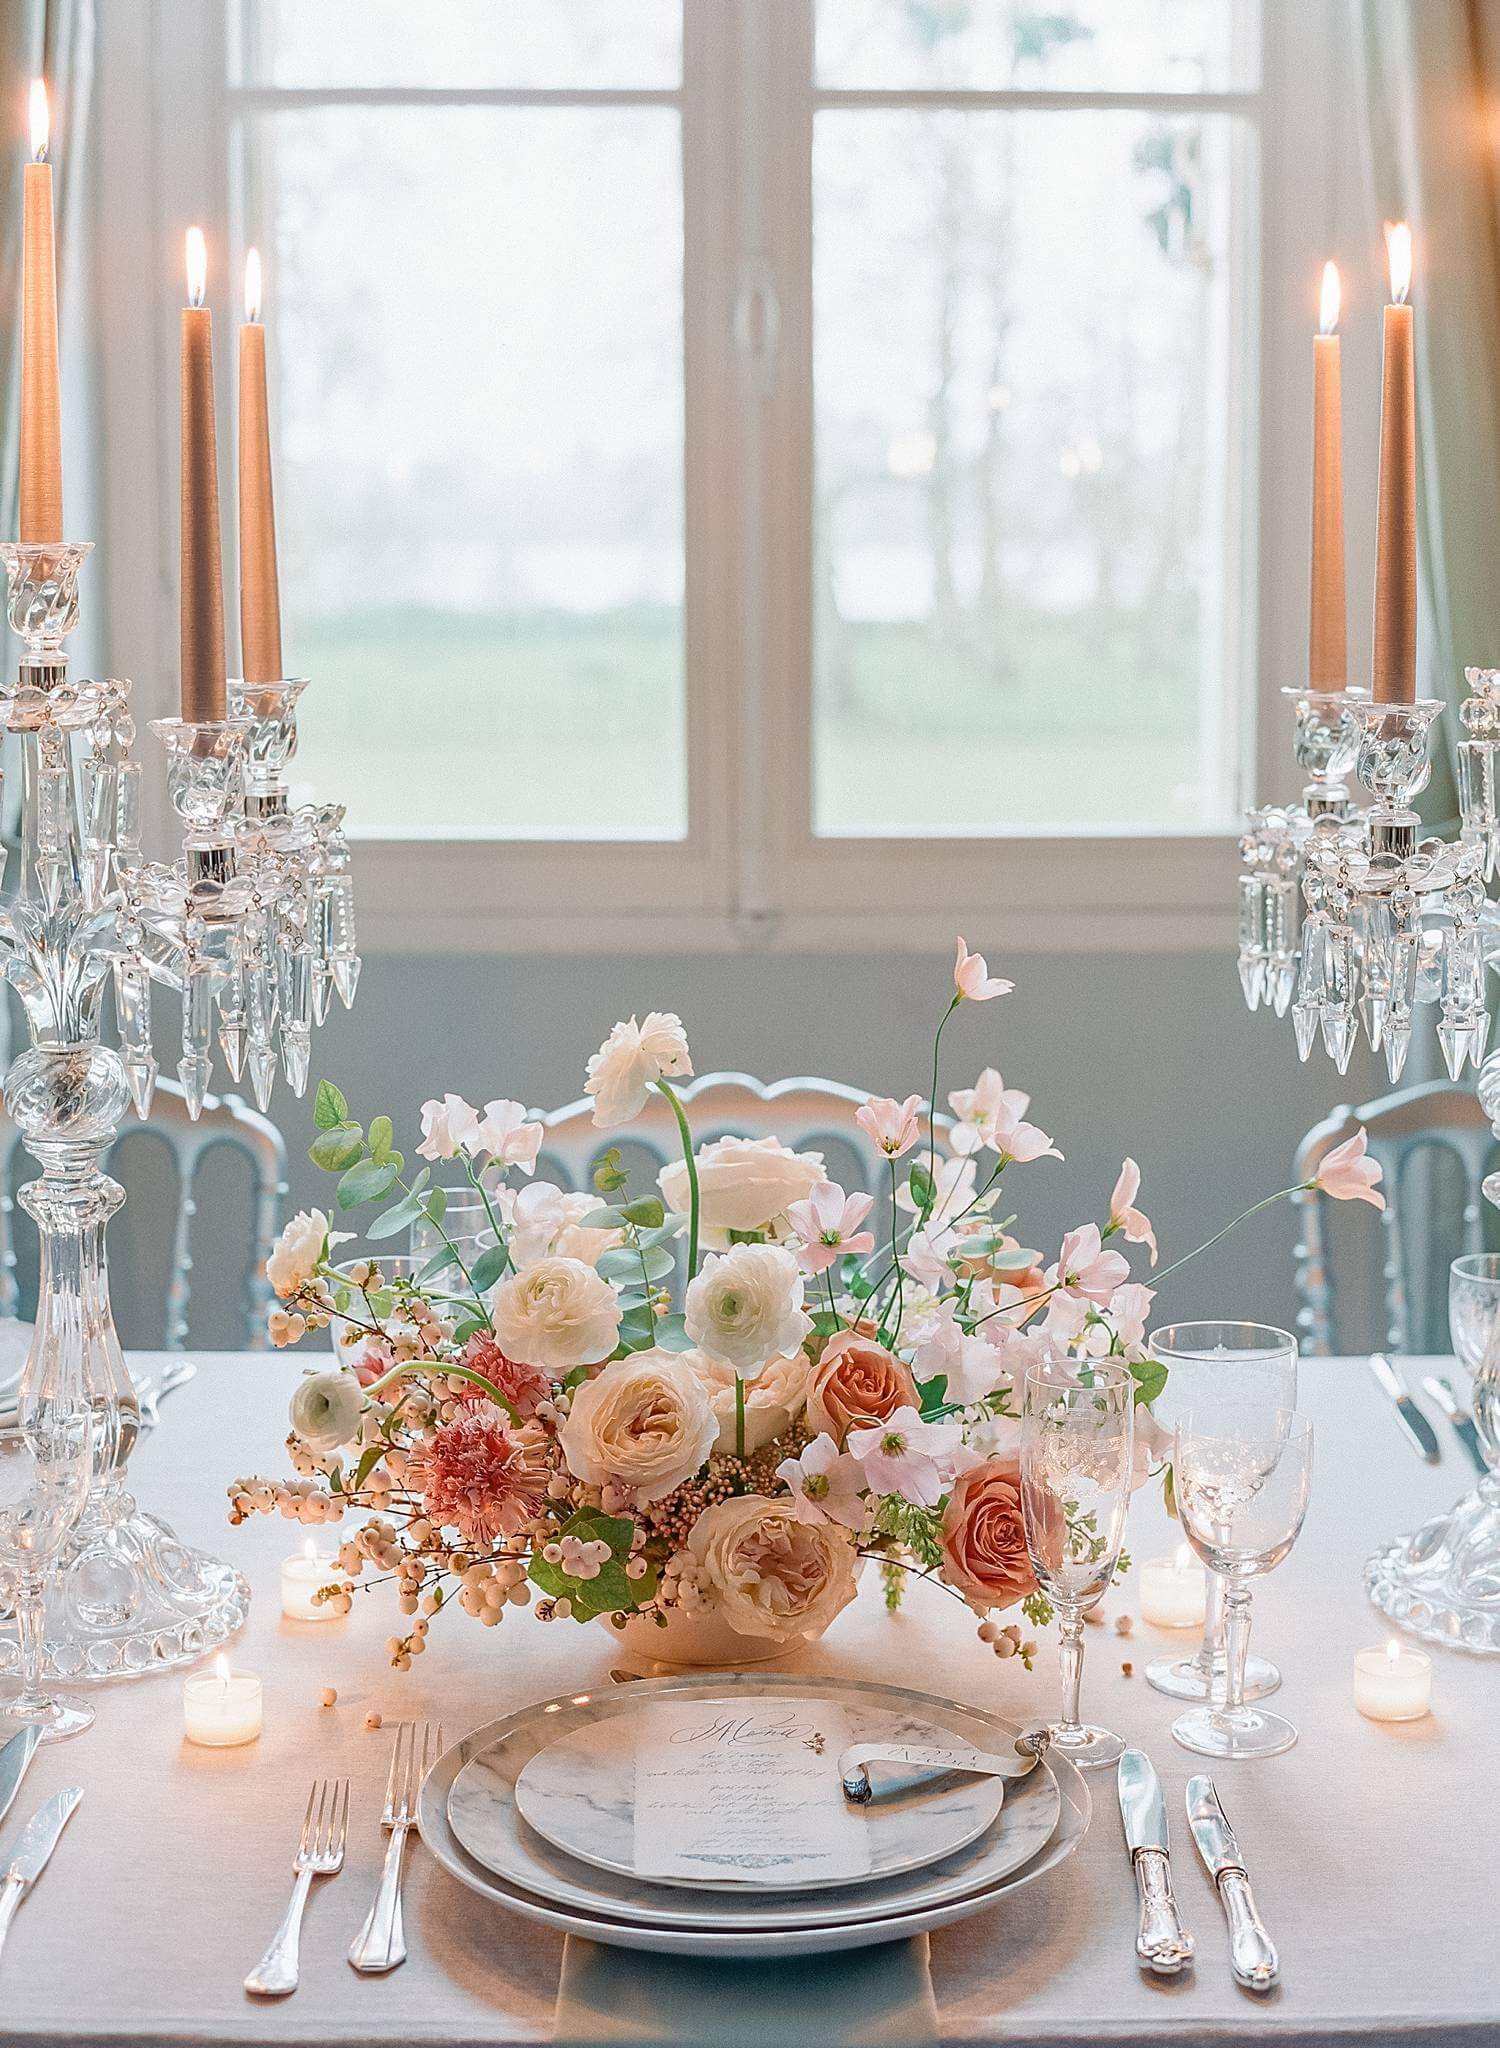 Table details at reception for an elopement at Chateau Couffins in Bordeaux France